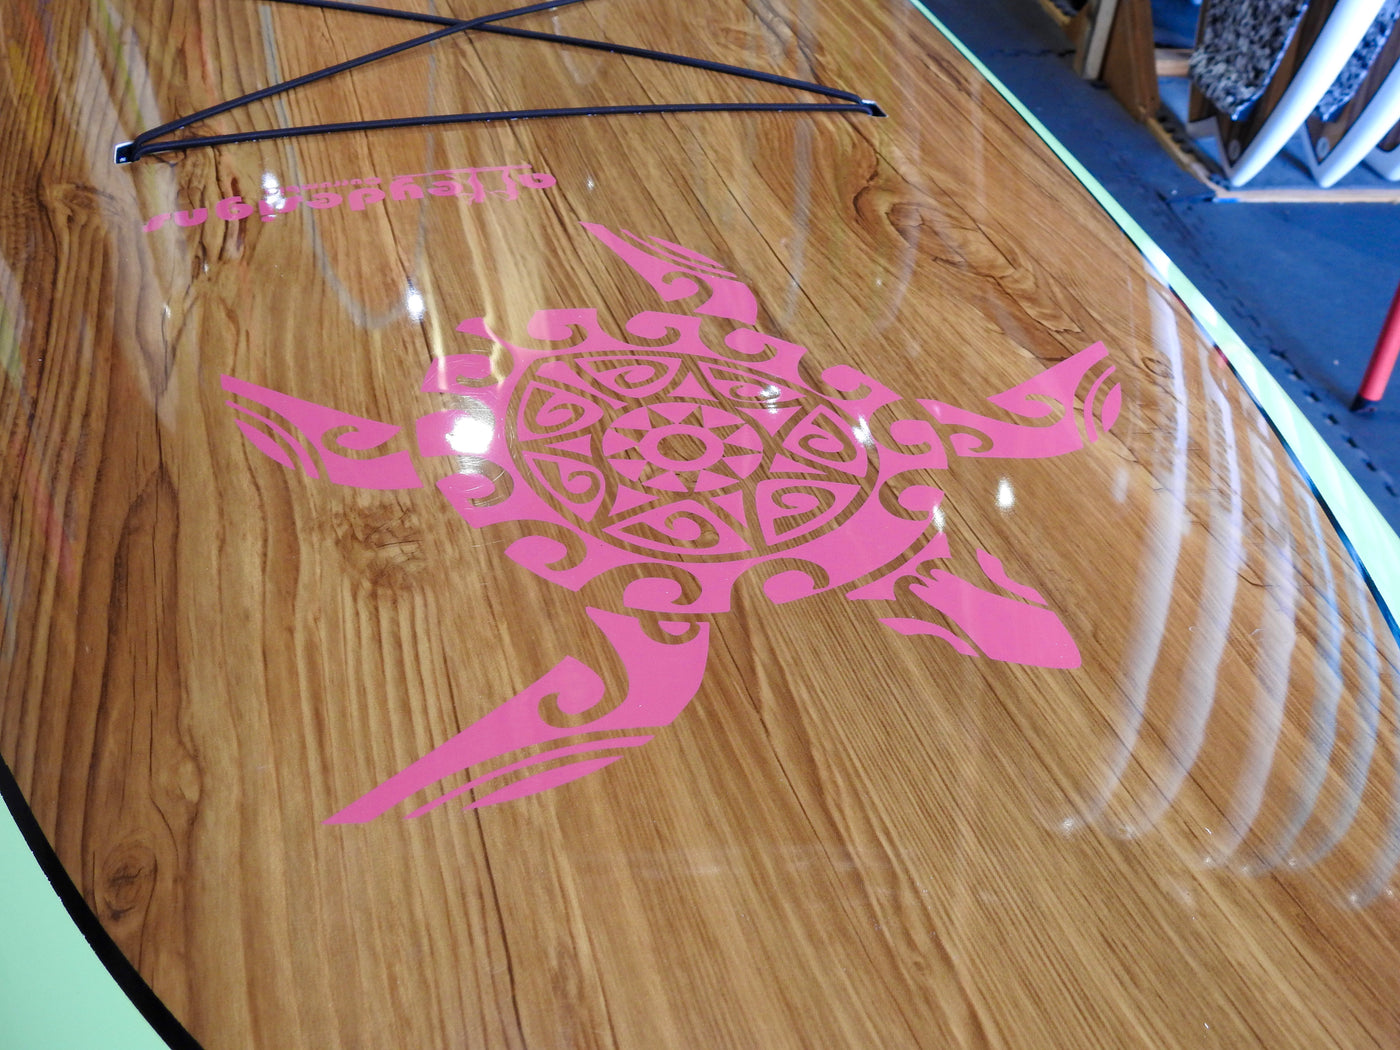 10’6” x 32” Timber Look Mint & Pink Turtle Thermo Mould Alleydesigns SUP - Alleydesigns  Pty Ltd                                             ABN: 44165571264